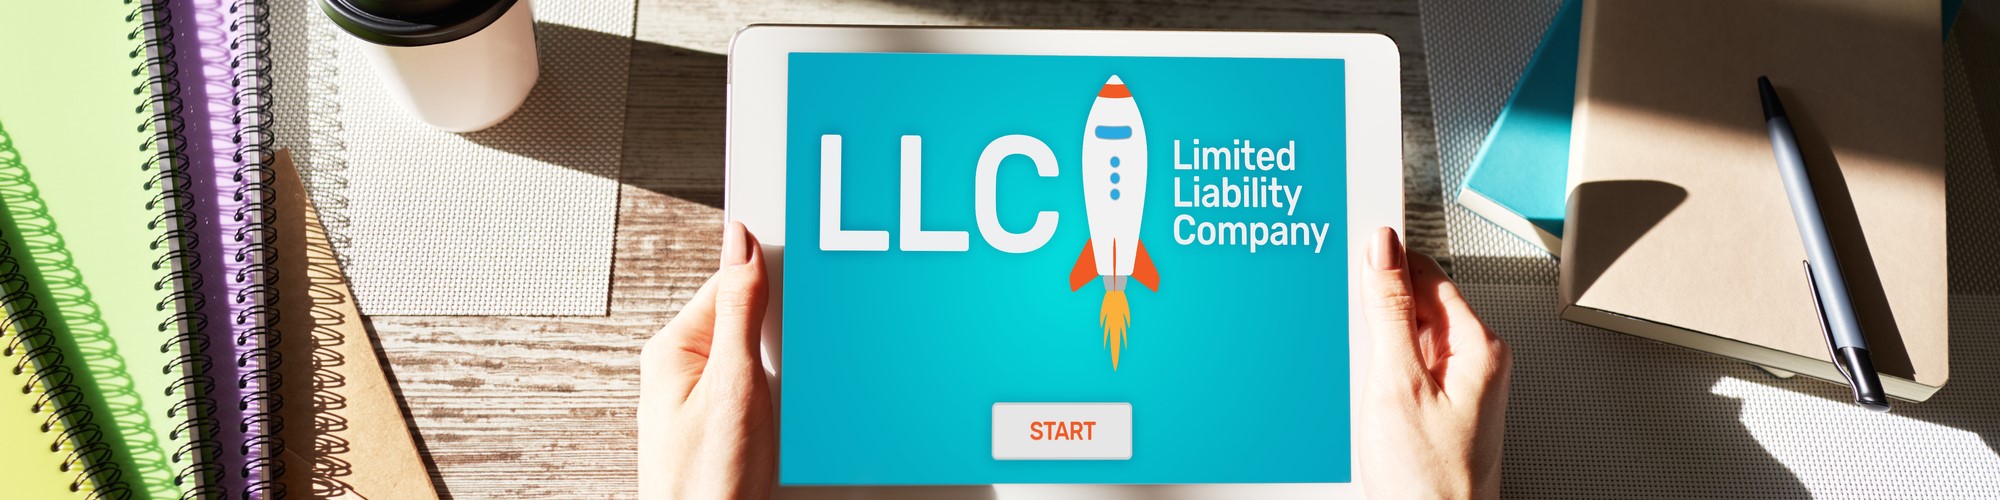 How To Form An LLC In 5 Easy Steps